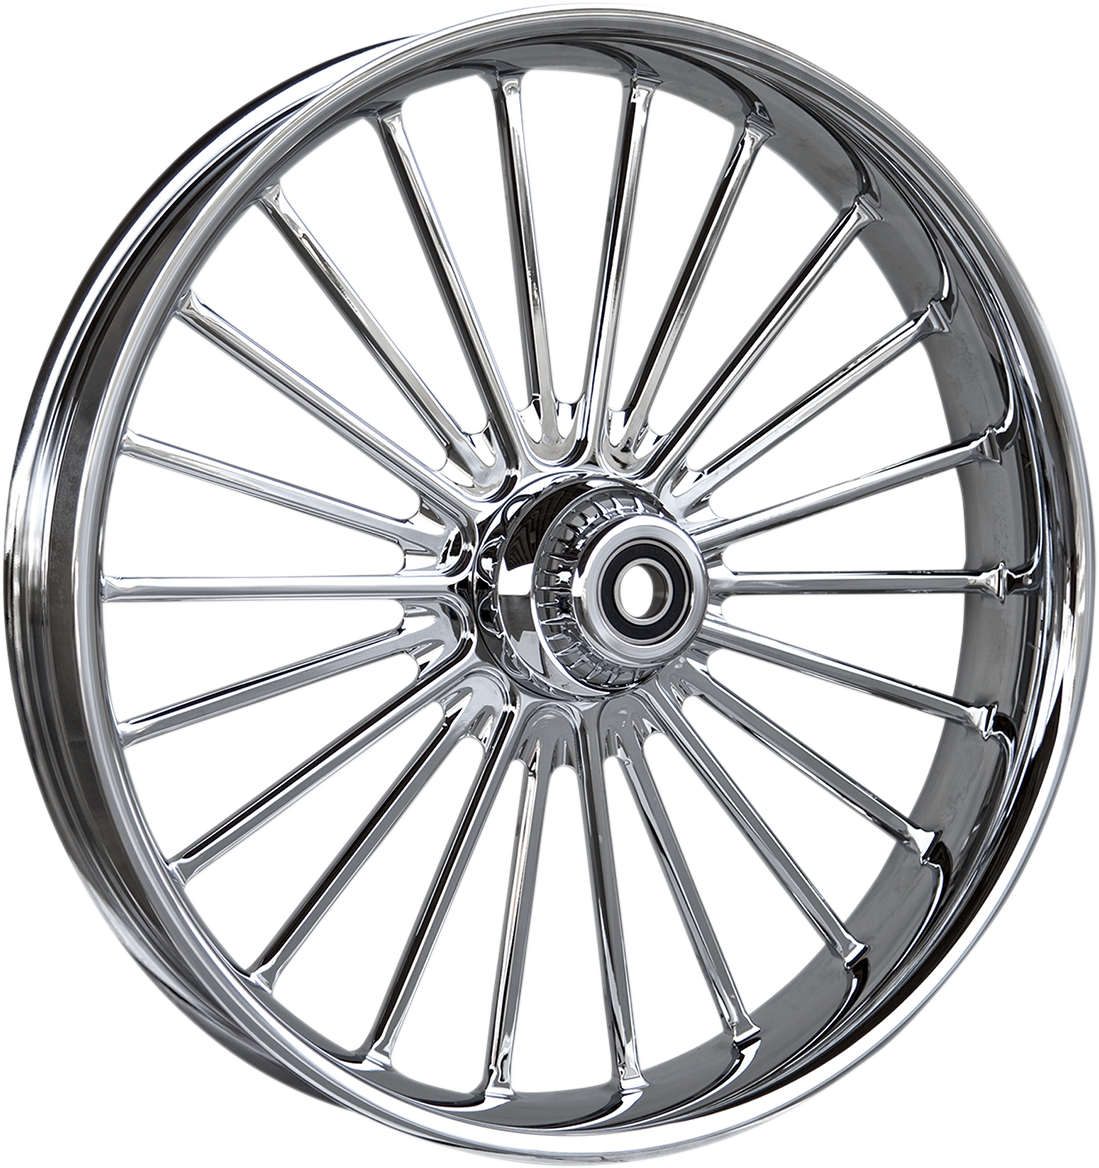 RC Components Illusion 21" x 3.50" Chrome Front Wheel 2014-2021 Harley Touring